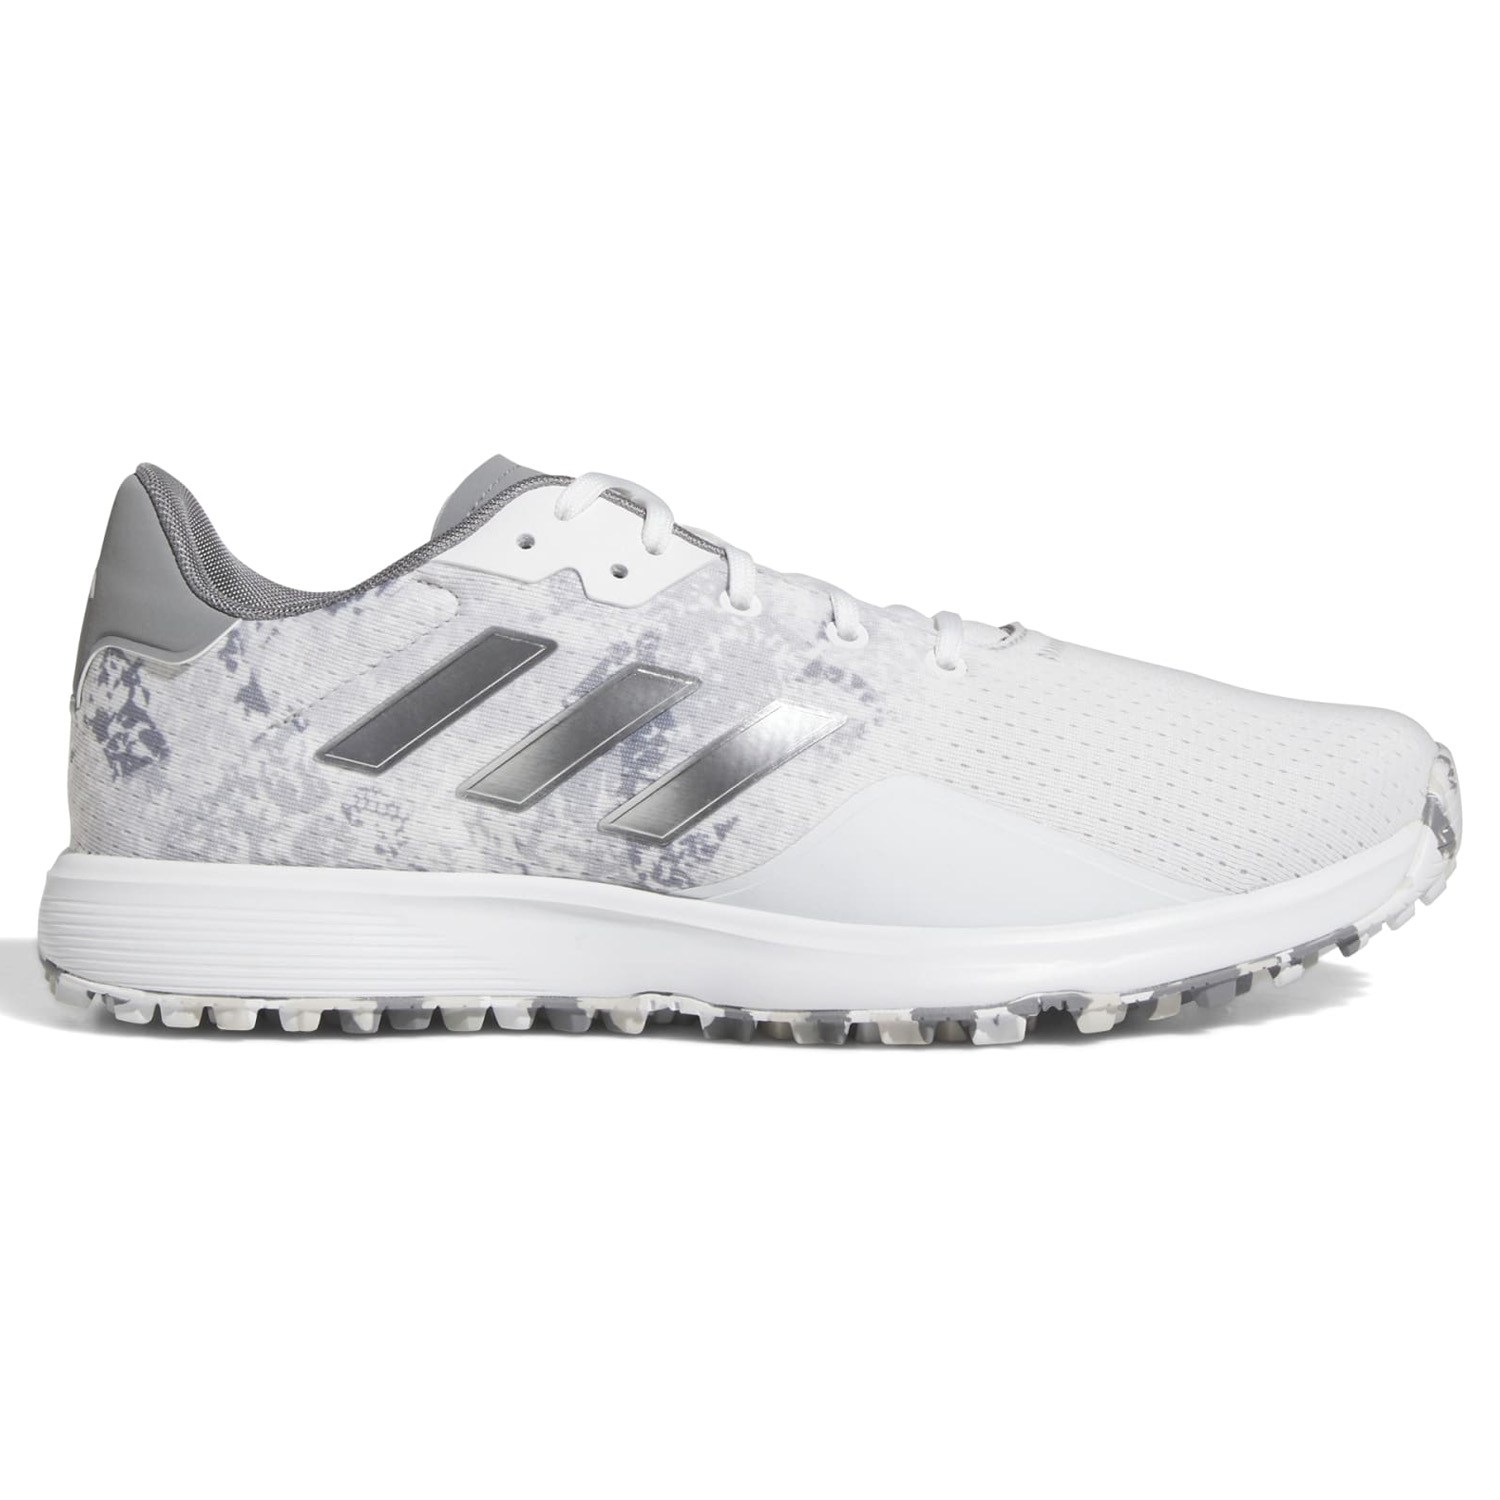 adidas S2G SL 23 Mens Spikeless Golf Shoes  - Grey Two/White/Grey Four